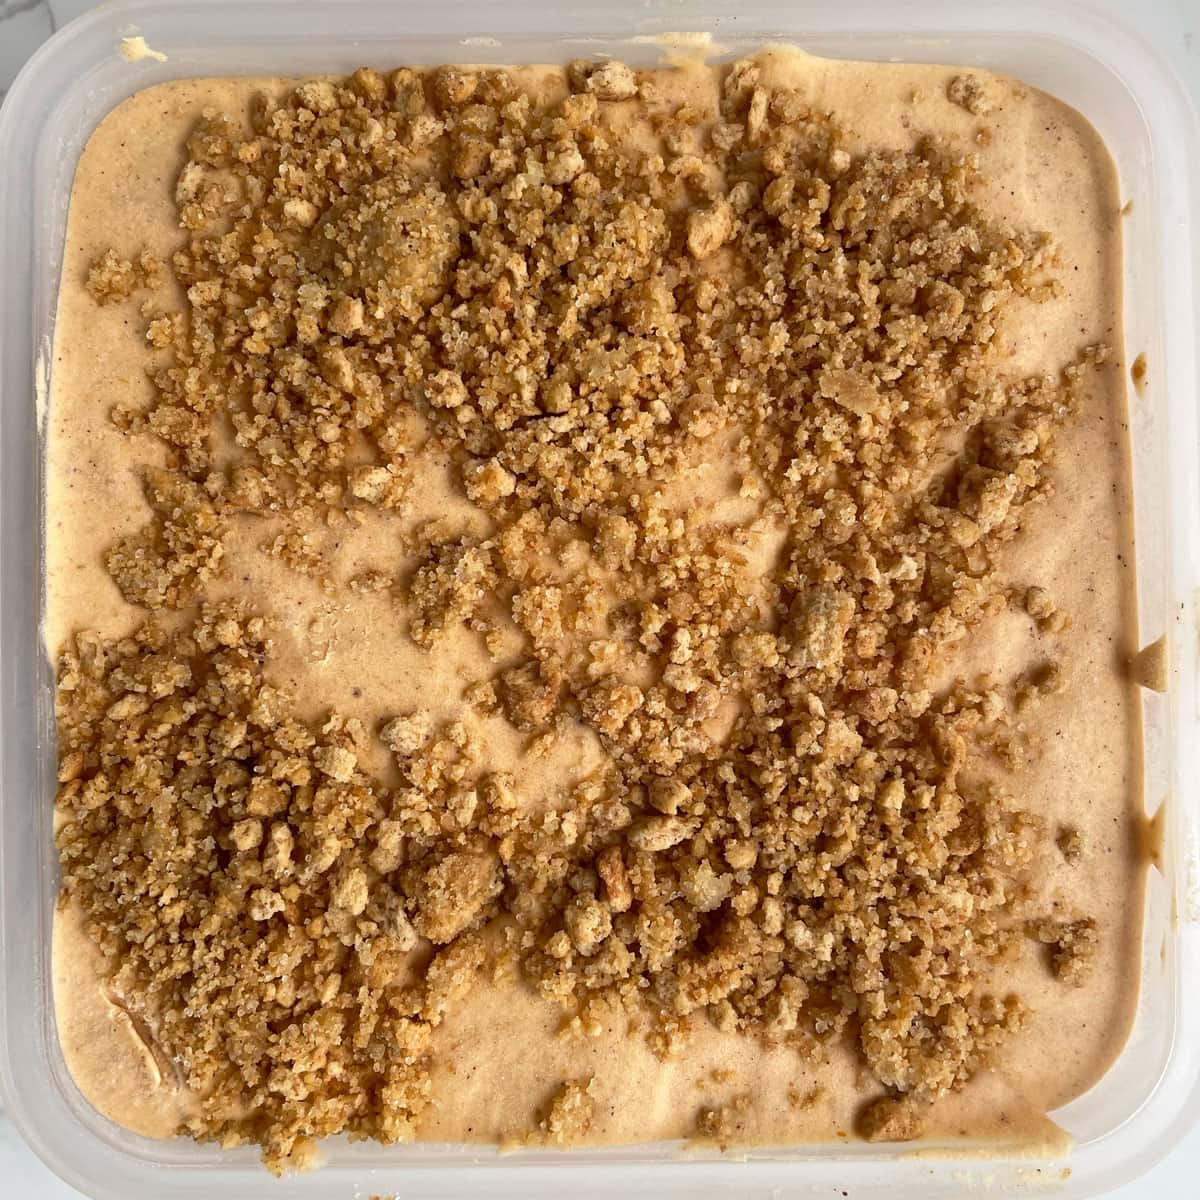 Pumpkin cheesecake ice cream in container.